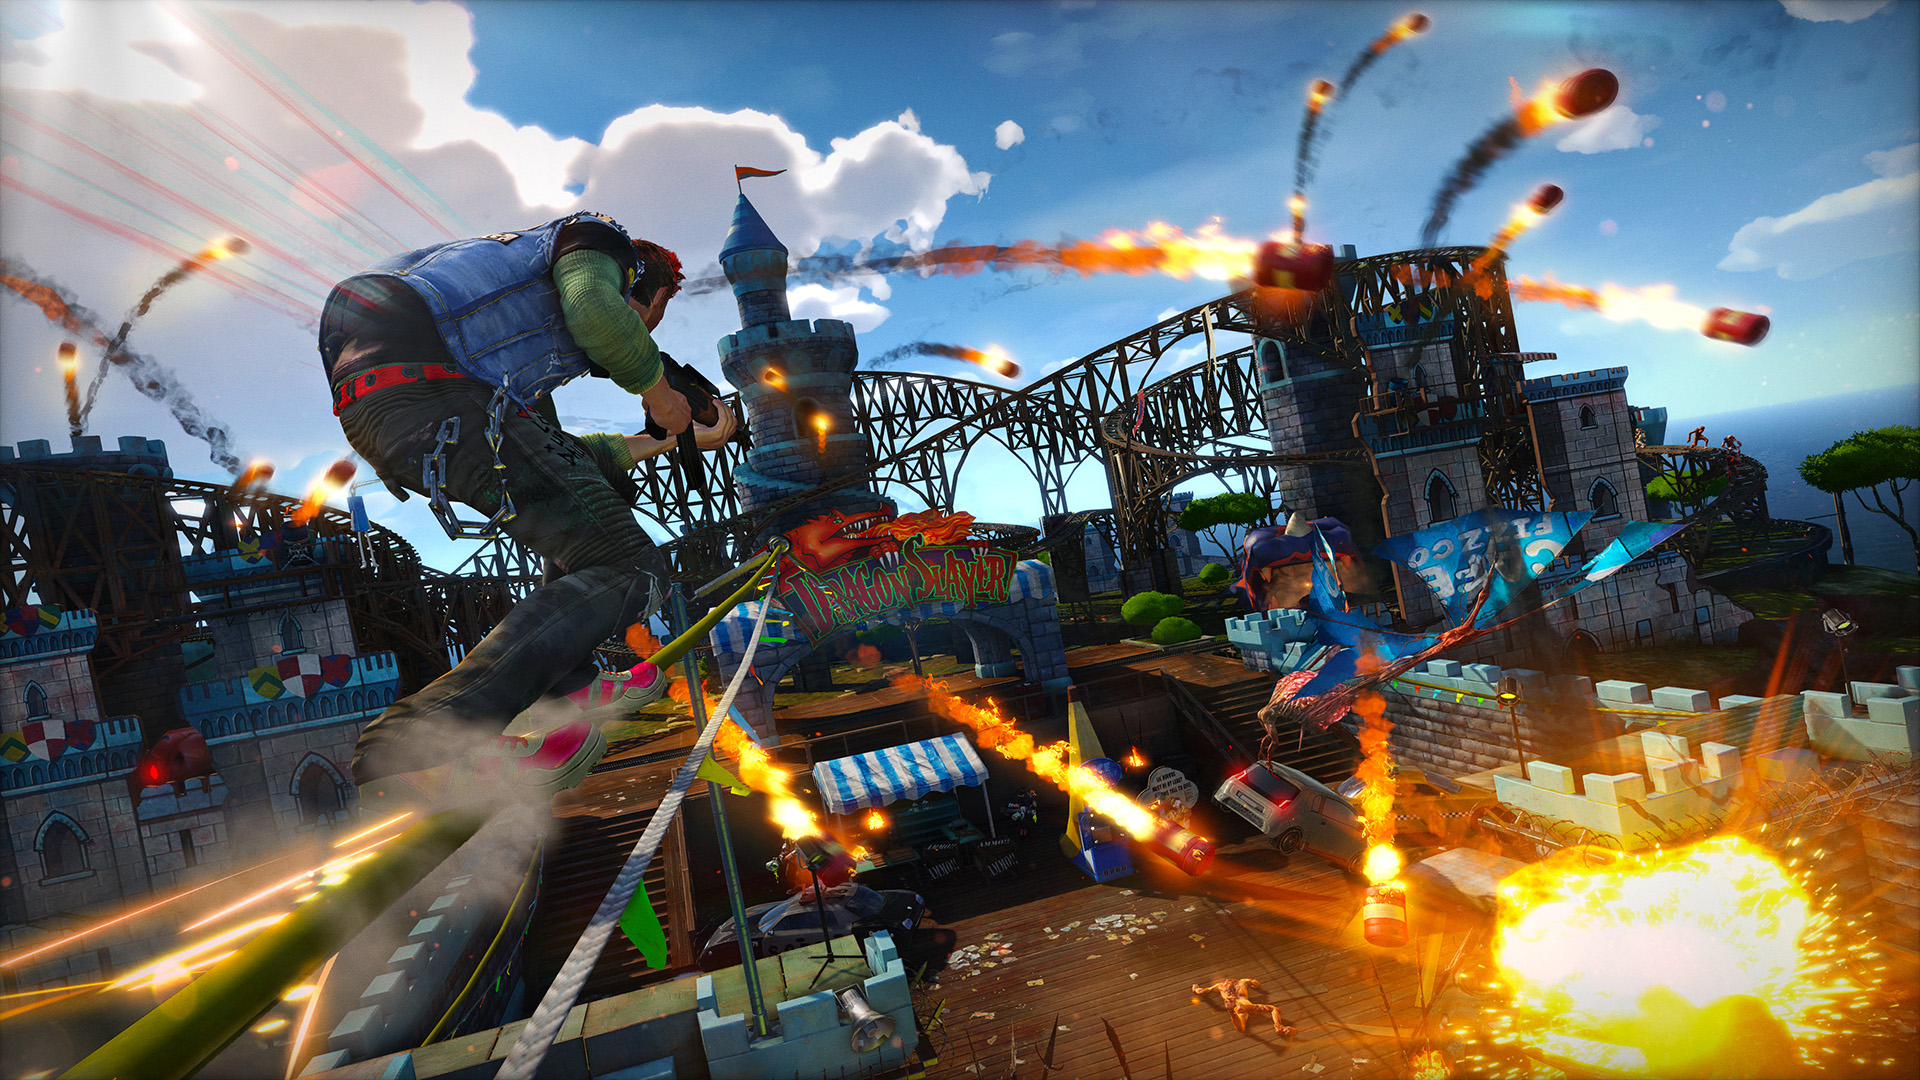 how many of you played sunset overdrive? it is my favorite game of all  time. : r/XboxGamePass